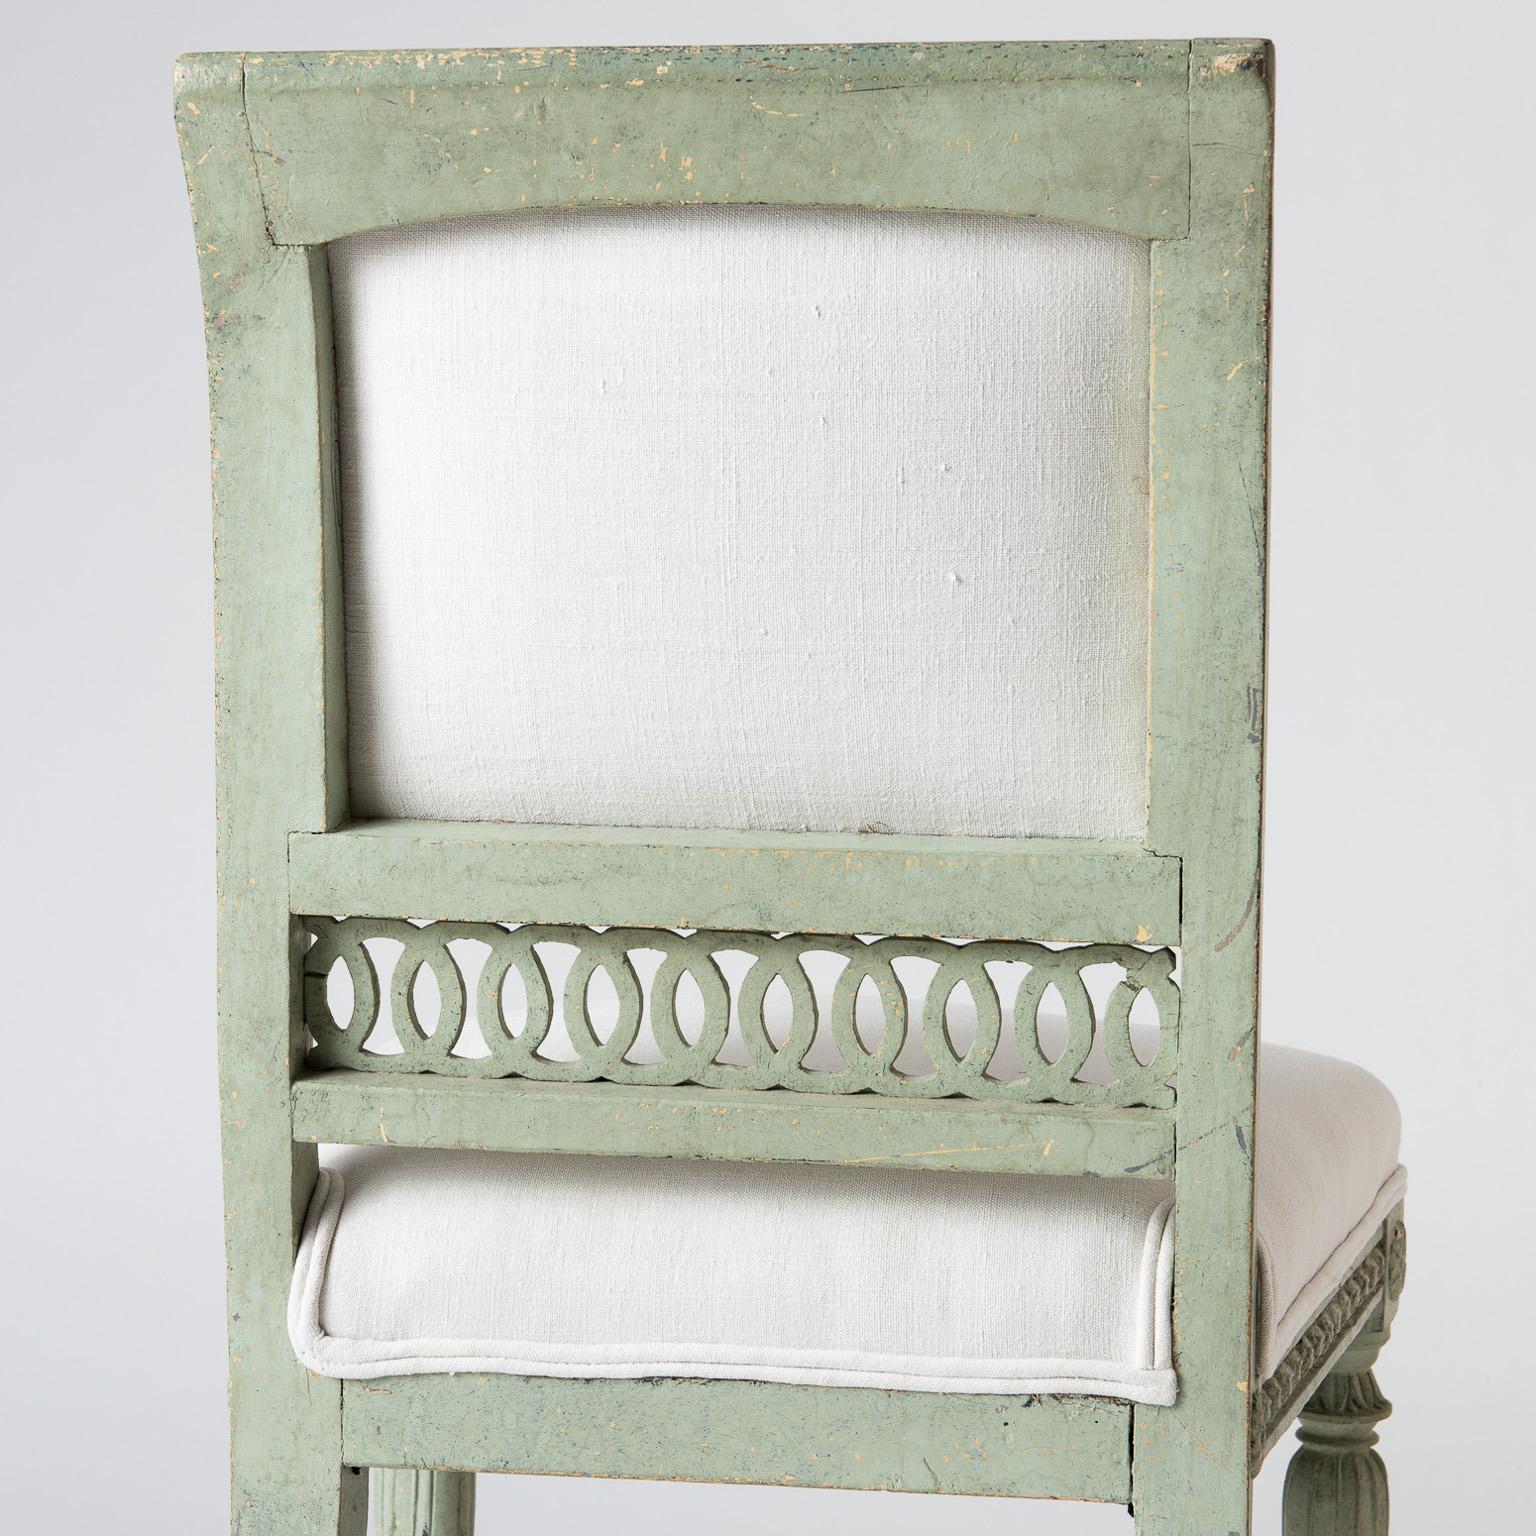 Pair of Swedish Gustavian Period Side Chairs in Old Green Paint, circa 1800 For Sale 5